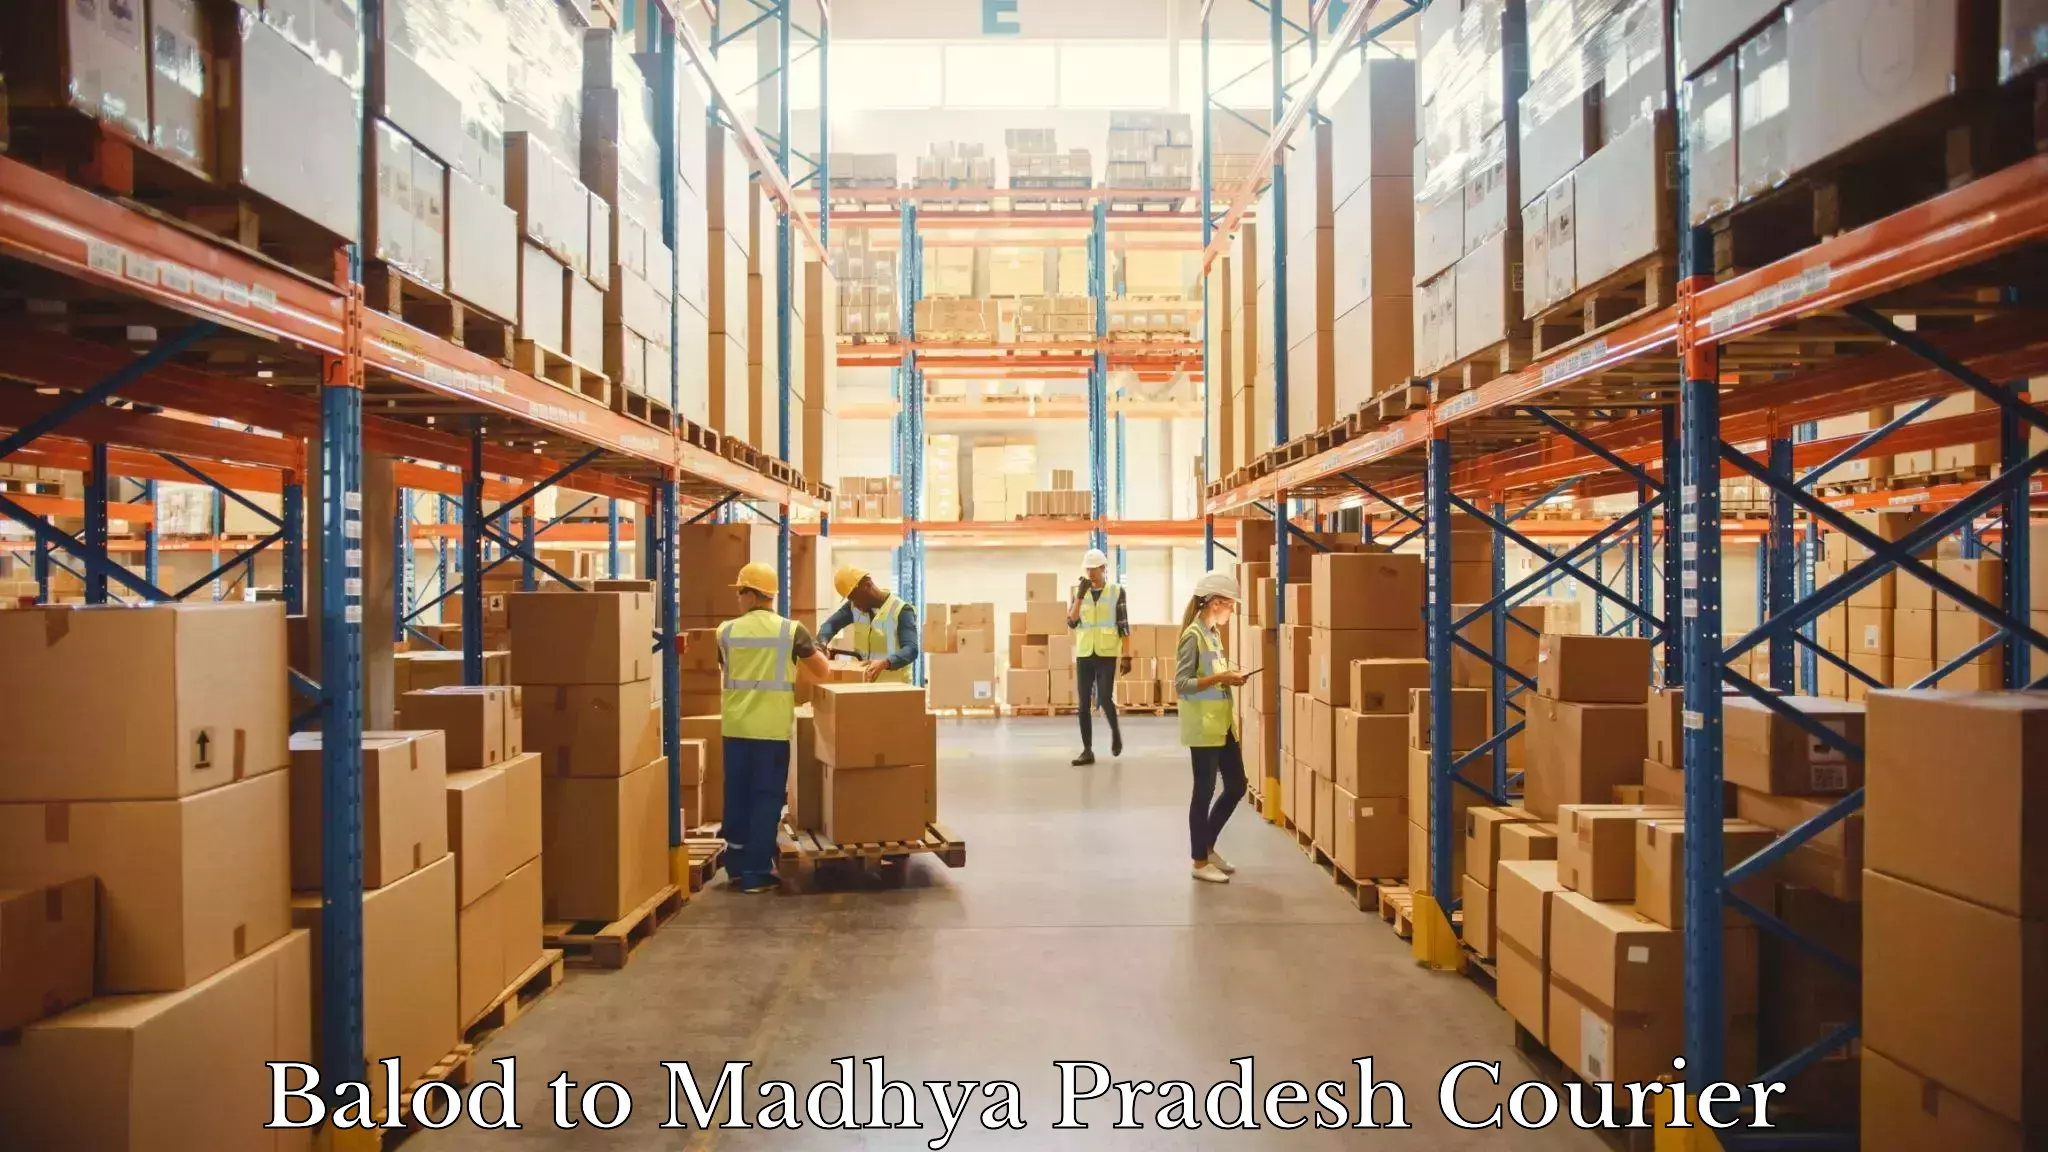 Parcel service for businesses Balod to Chandla